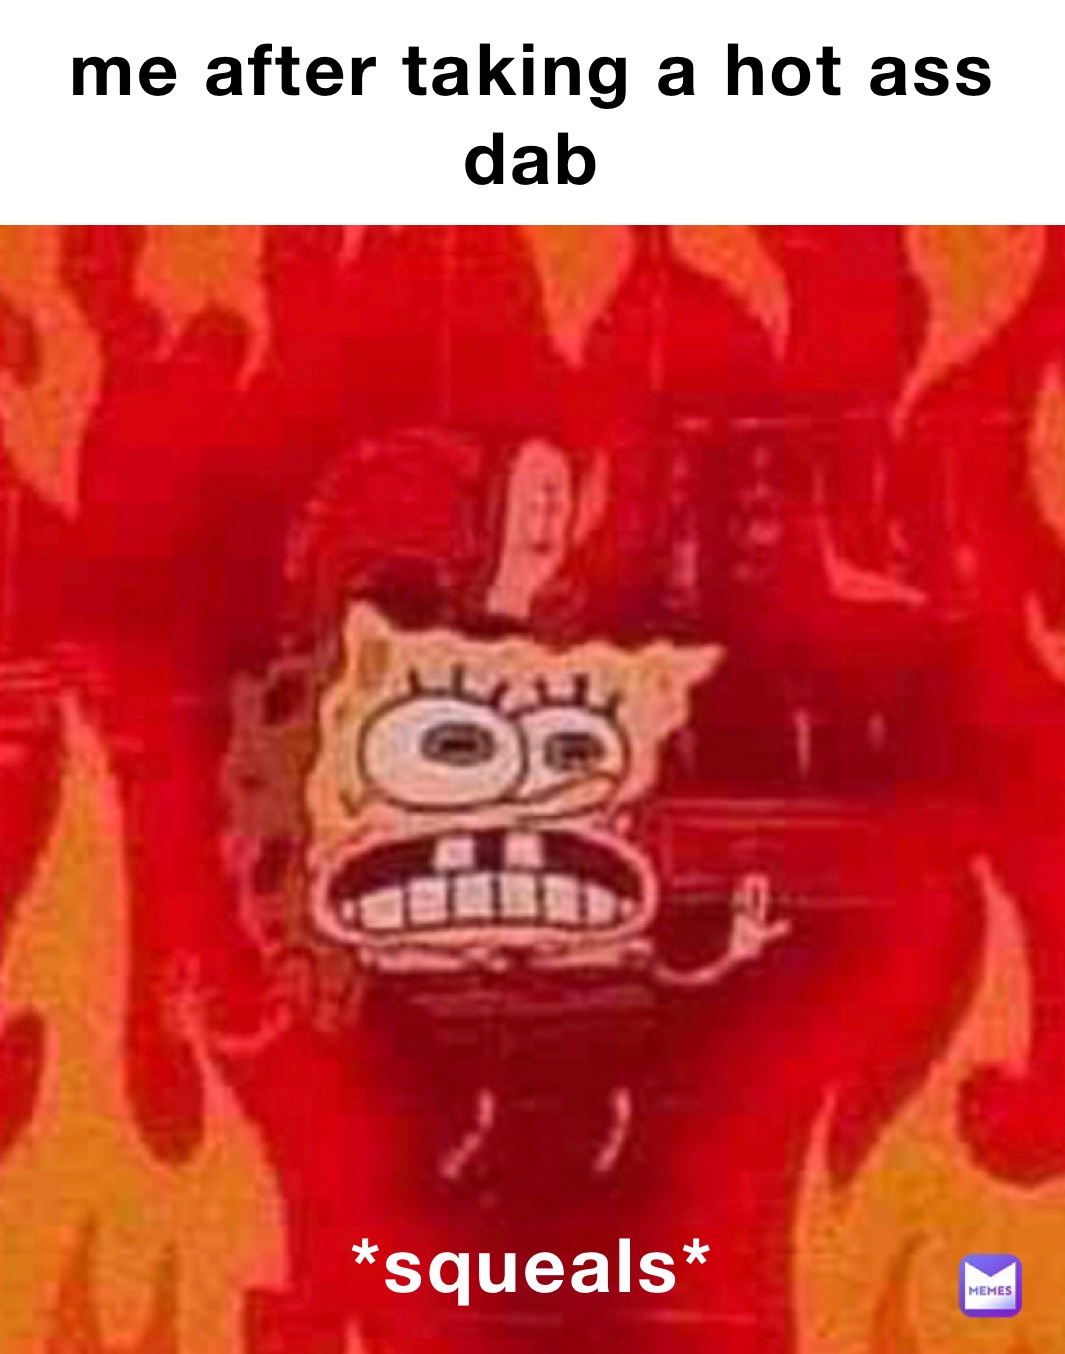 me after taking a hot ass dab *squeals*